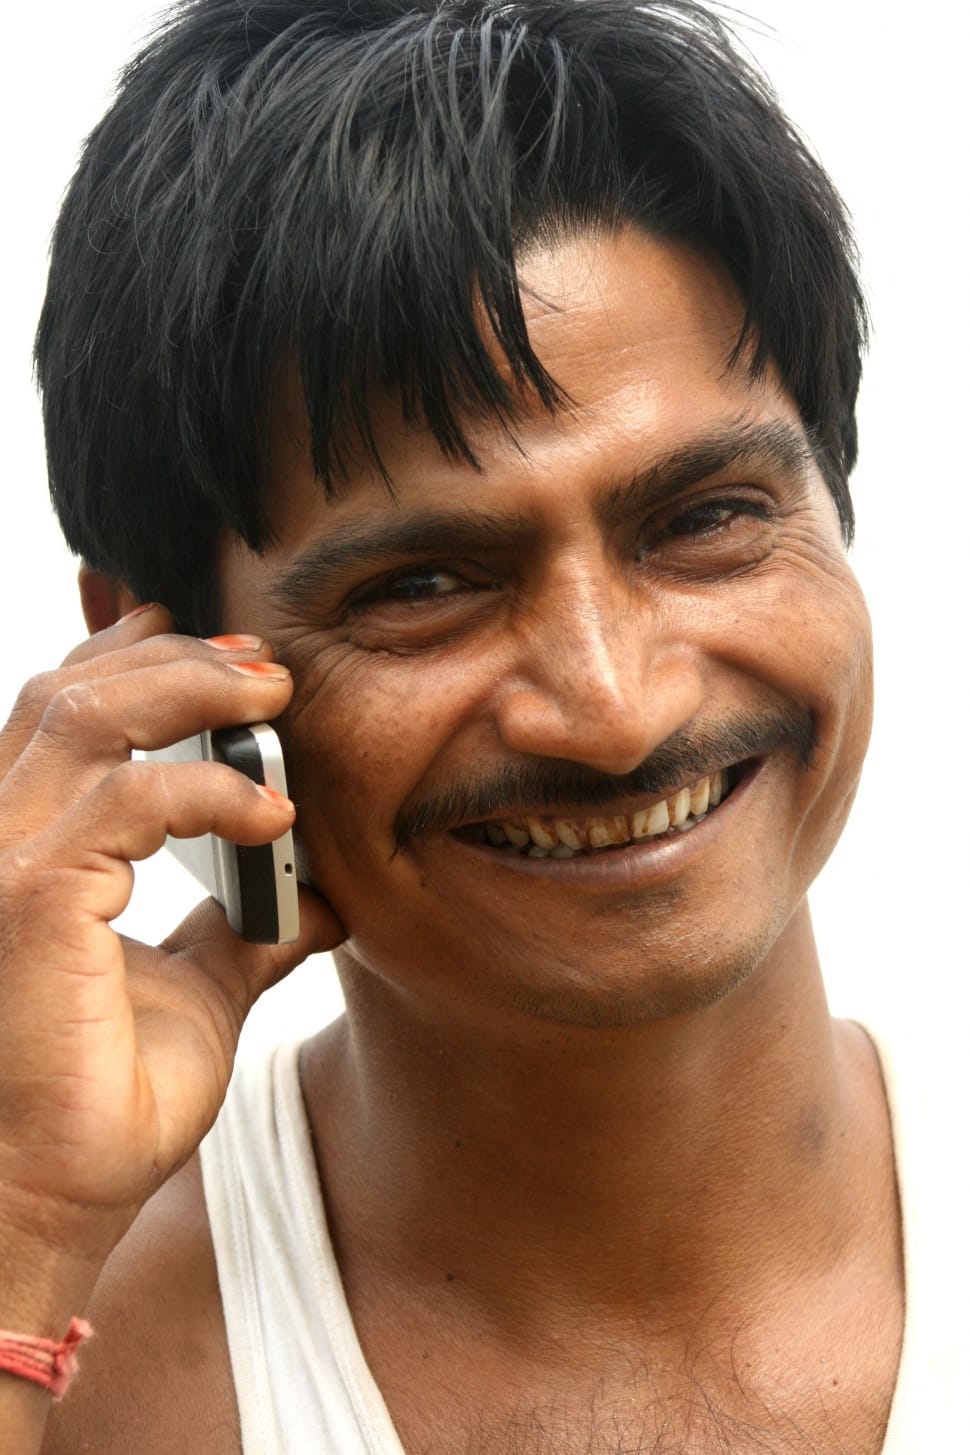 man wearing white tank top holding white and black candybar phone preview